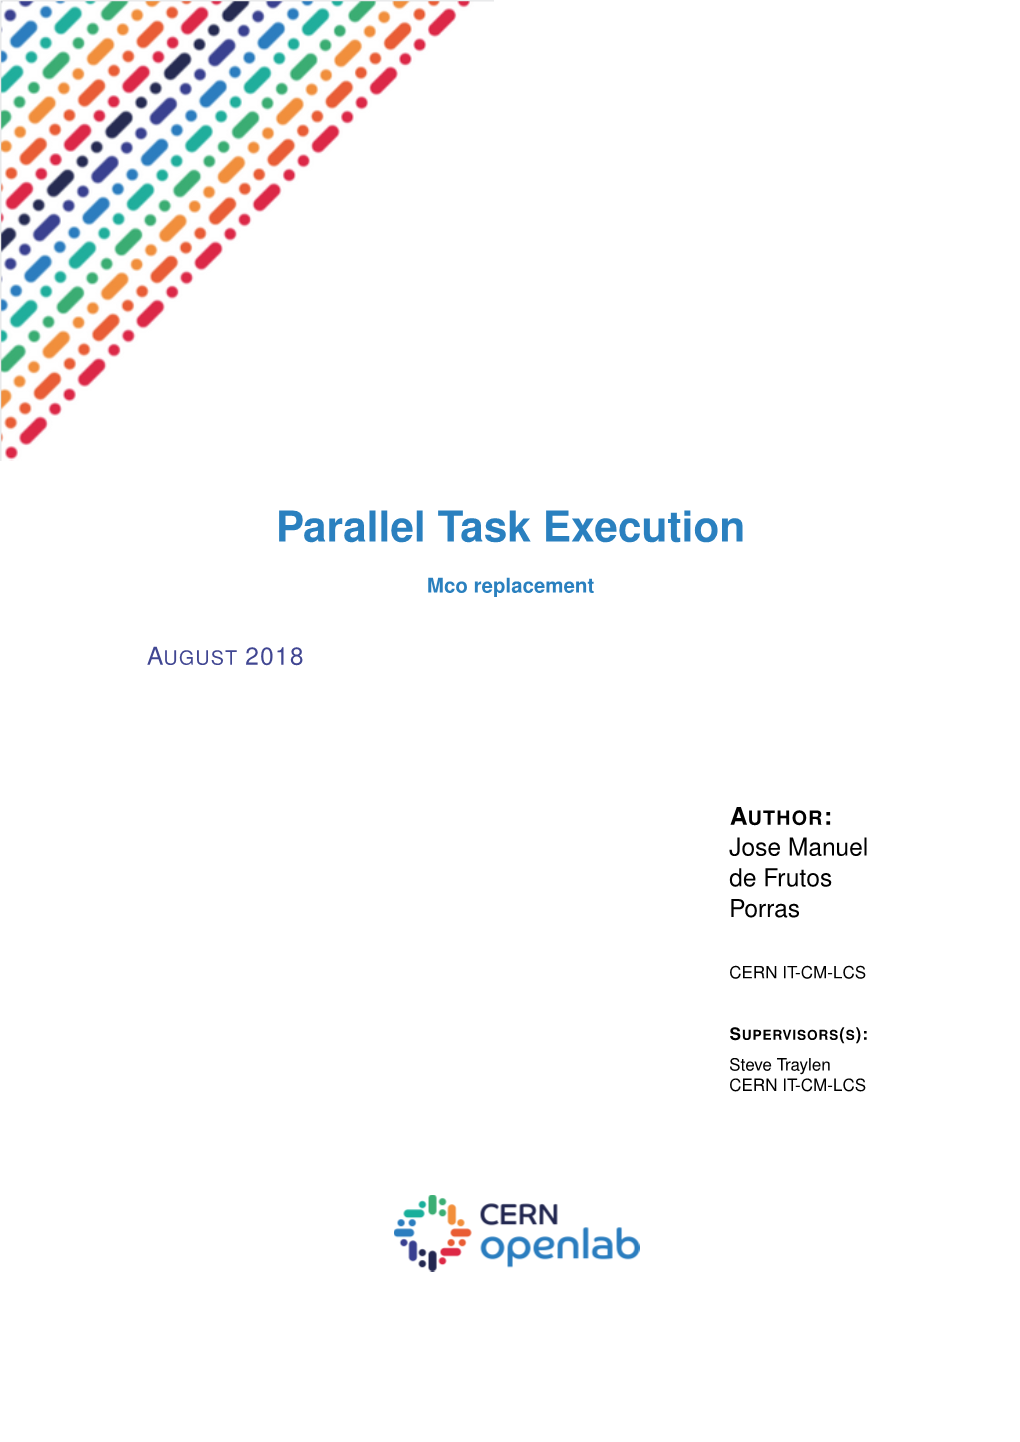 Parallel Task Execution